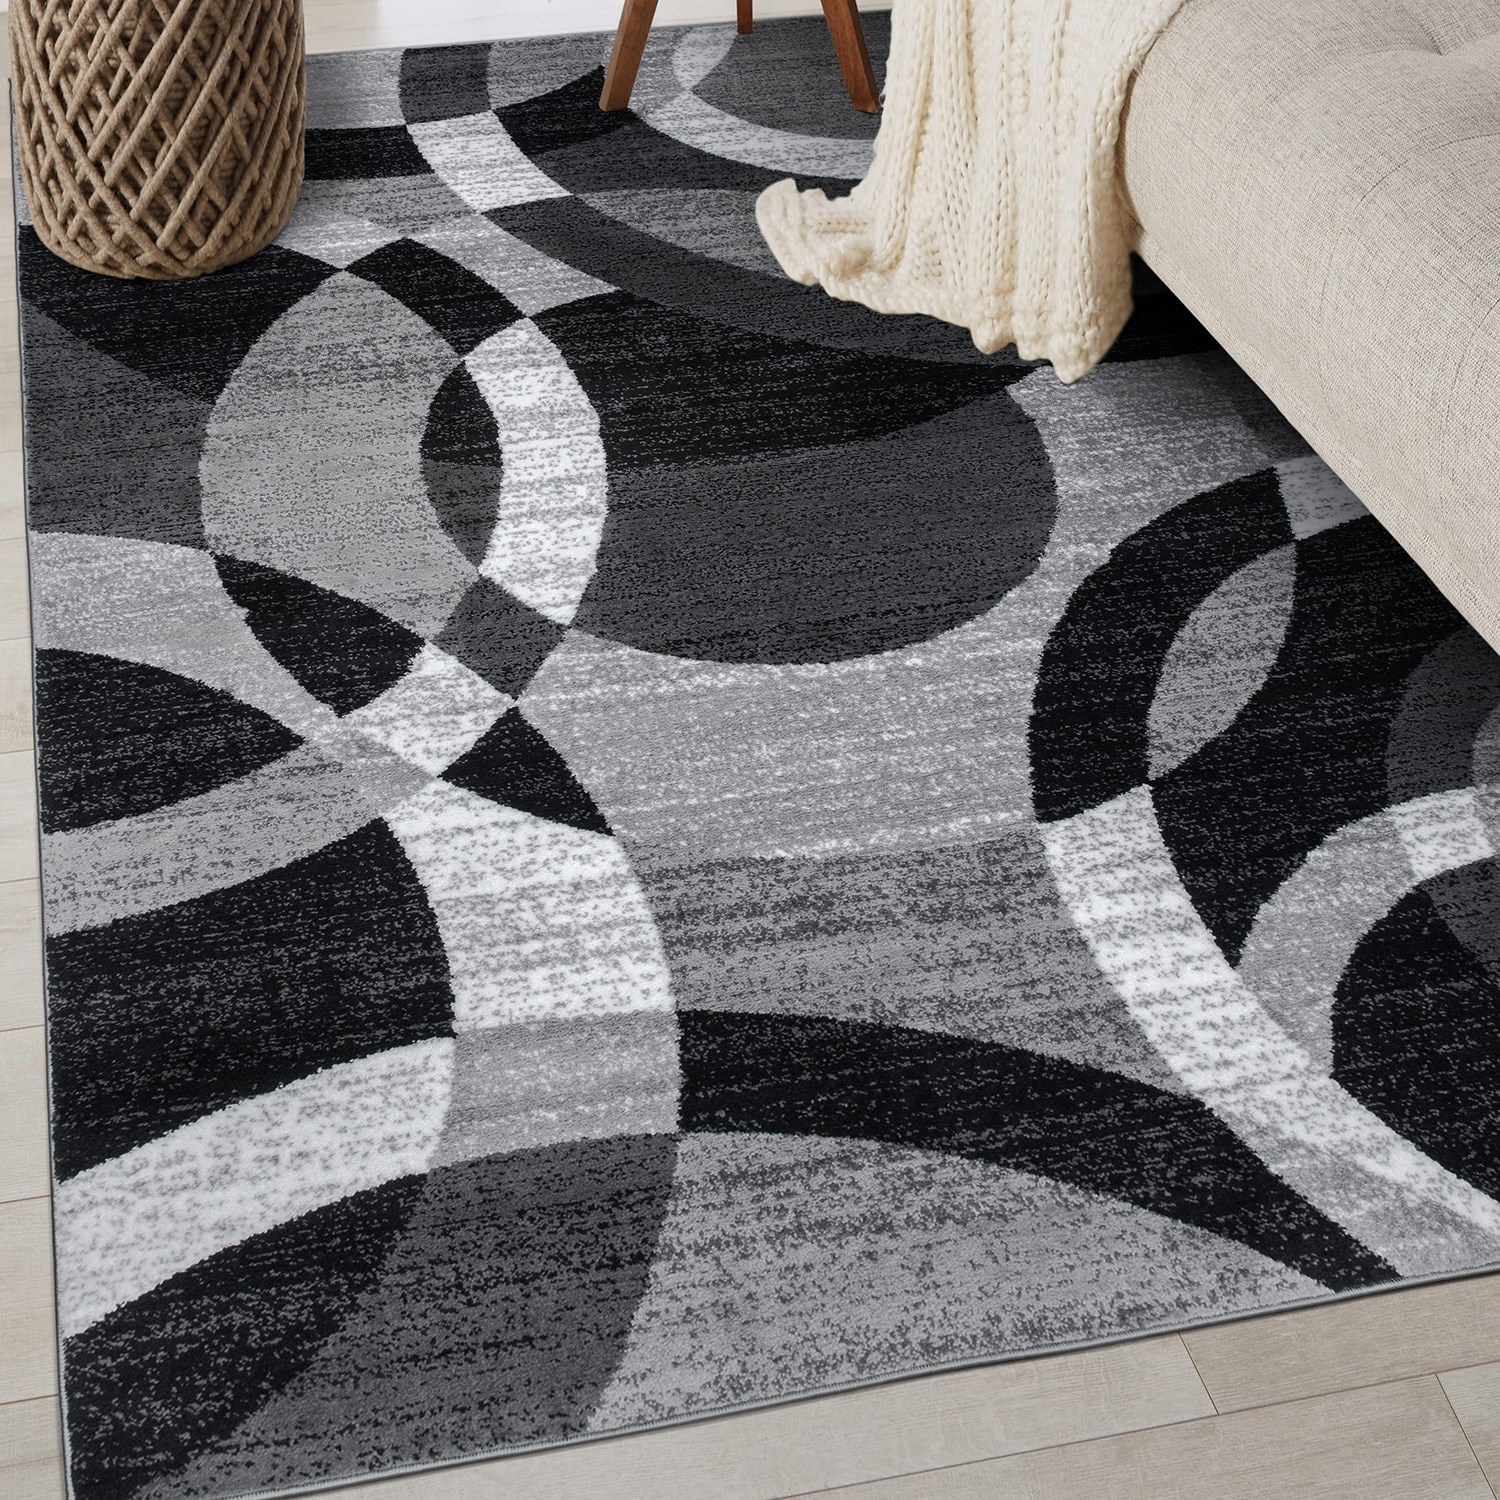 https://ak1.ostkcdn.com/images/products/is/images/direct/cfaf29eae85e75cea71fb1600d433c9158fb0925/World-Rug-Gallery-Geometric-Circles-Area-Rug.jpg